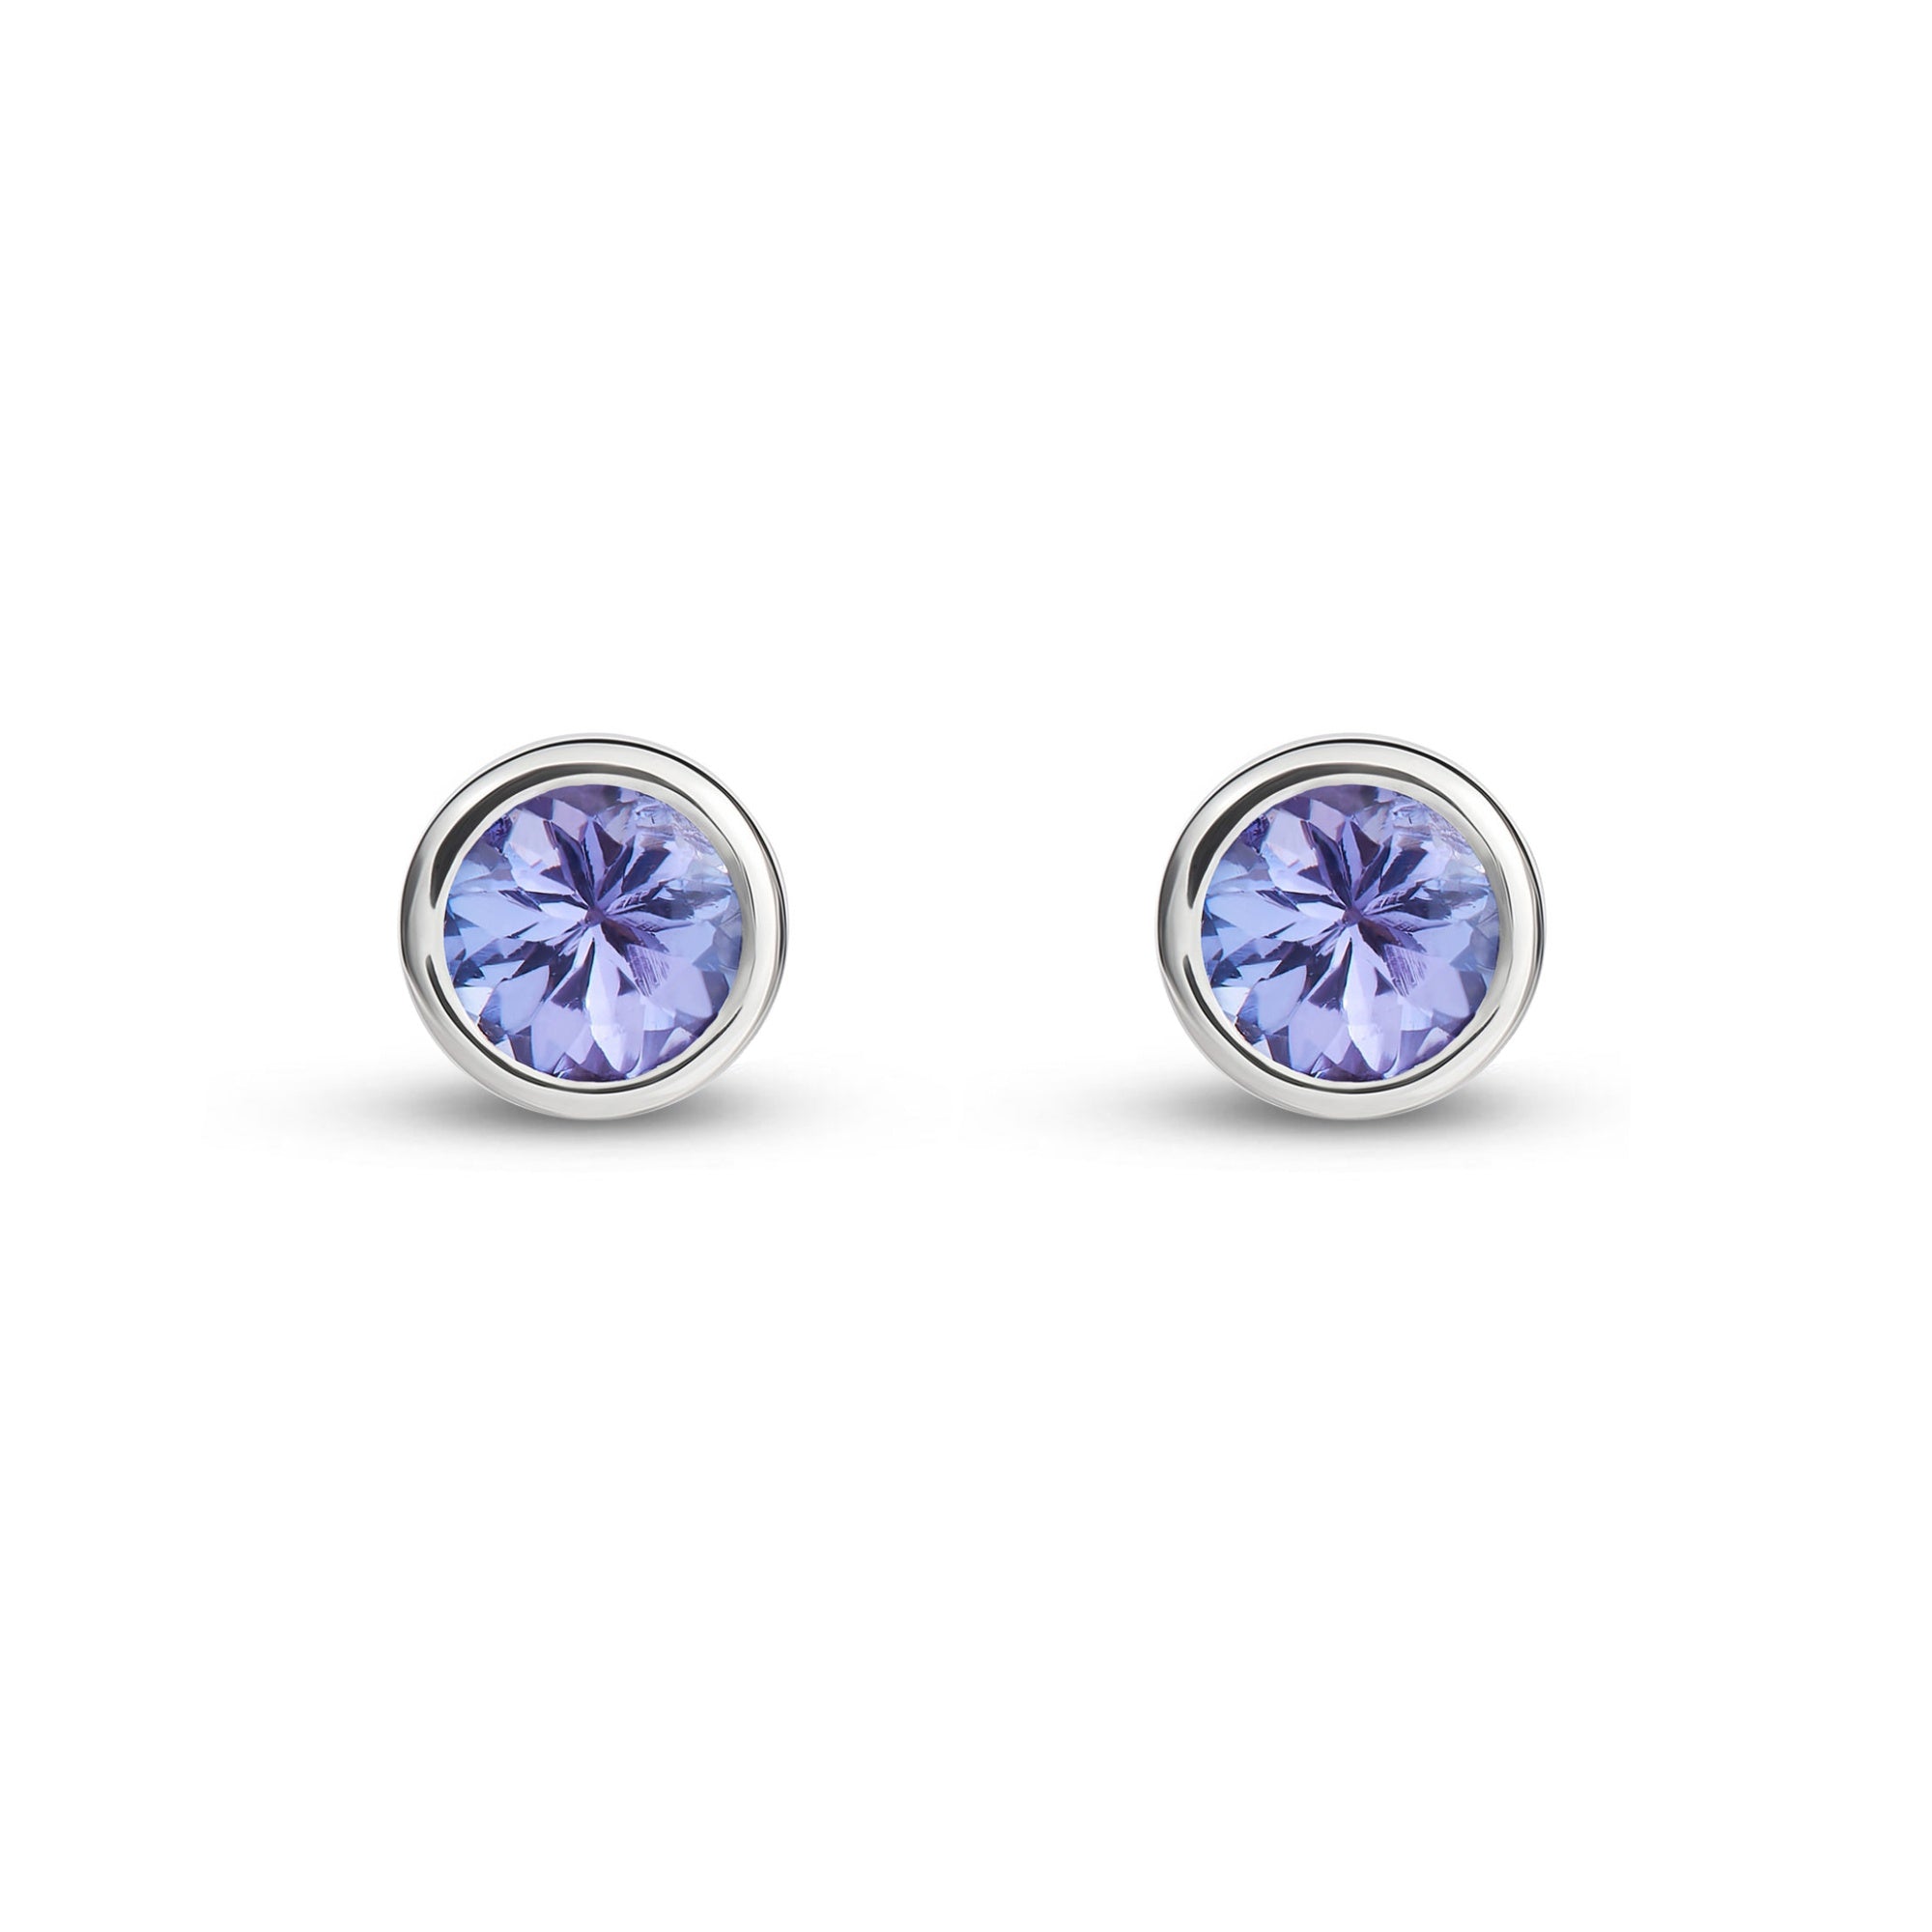 9ct White Gold 4mm Rubover Tanzanite Stud Earrings 0.58ct